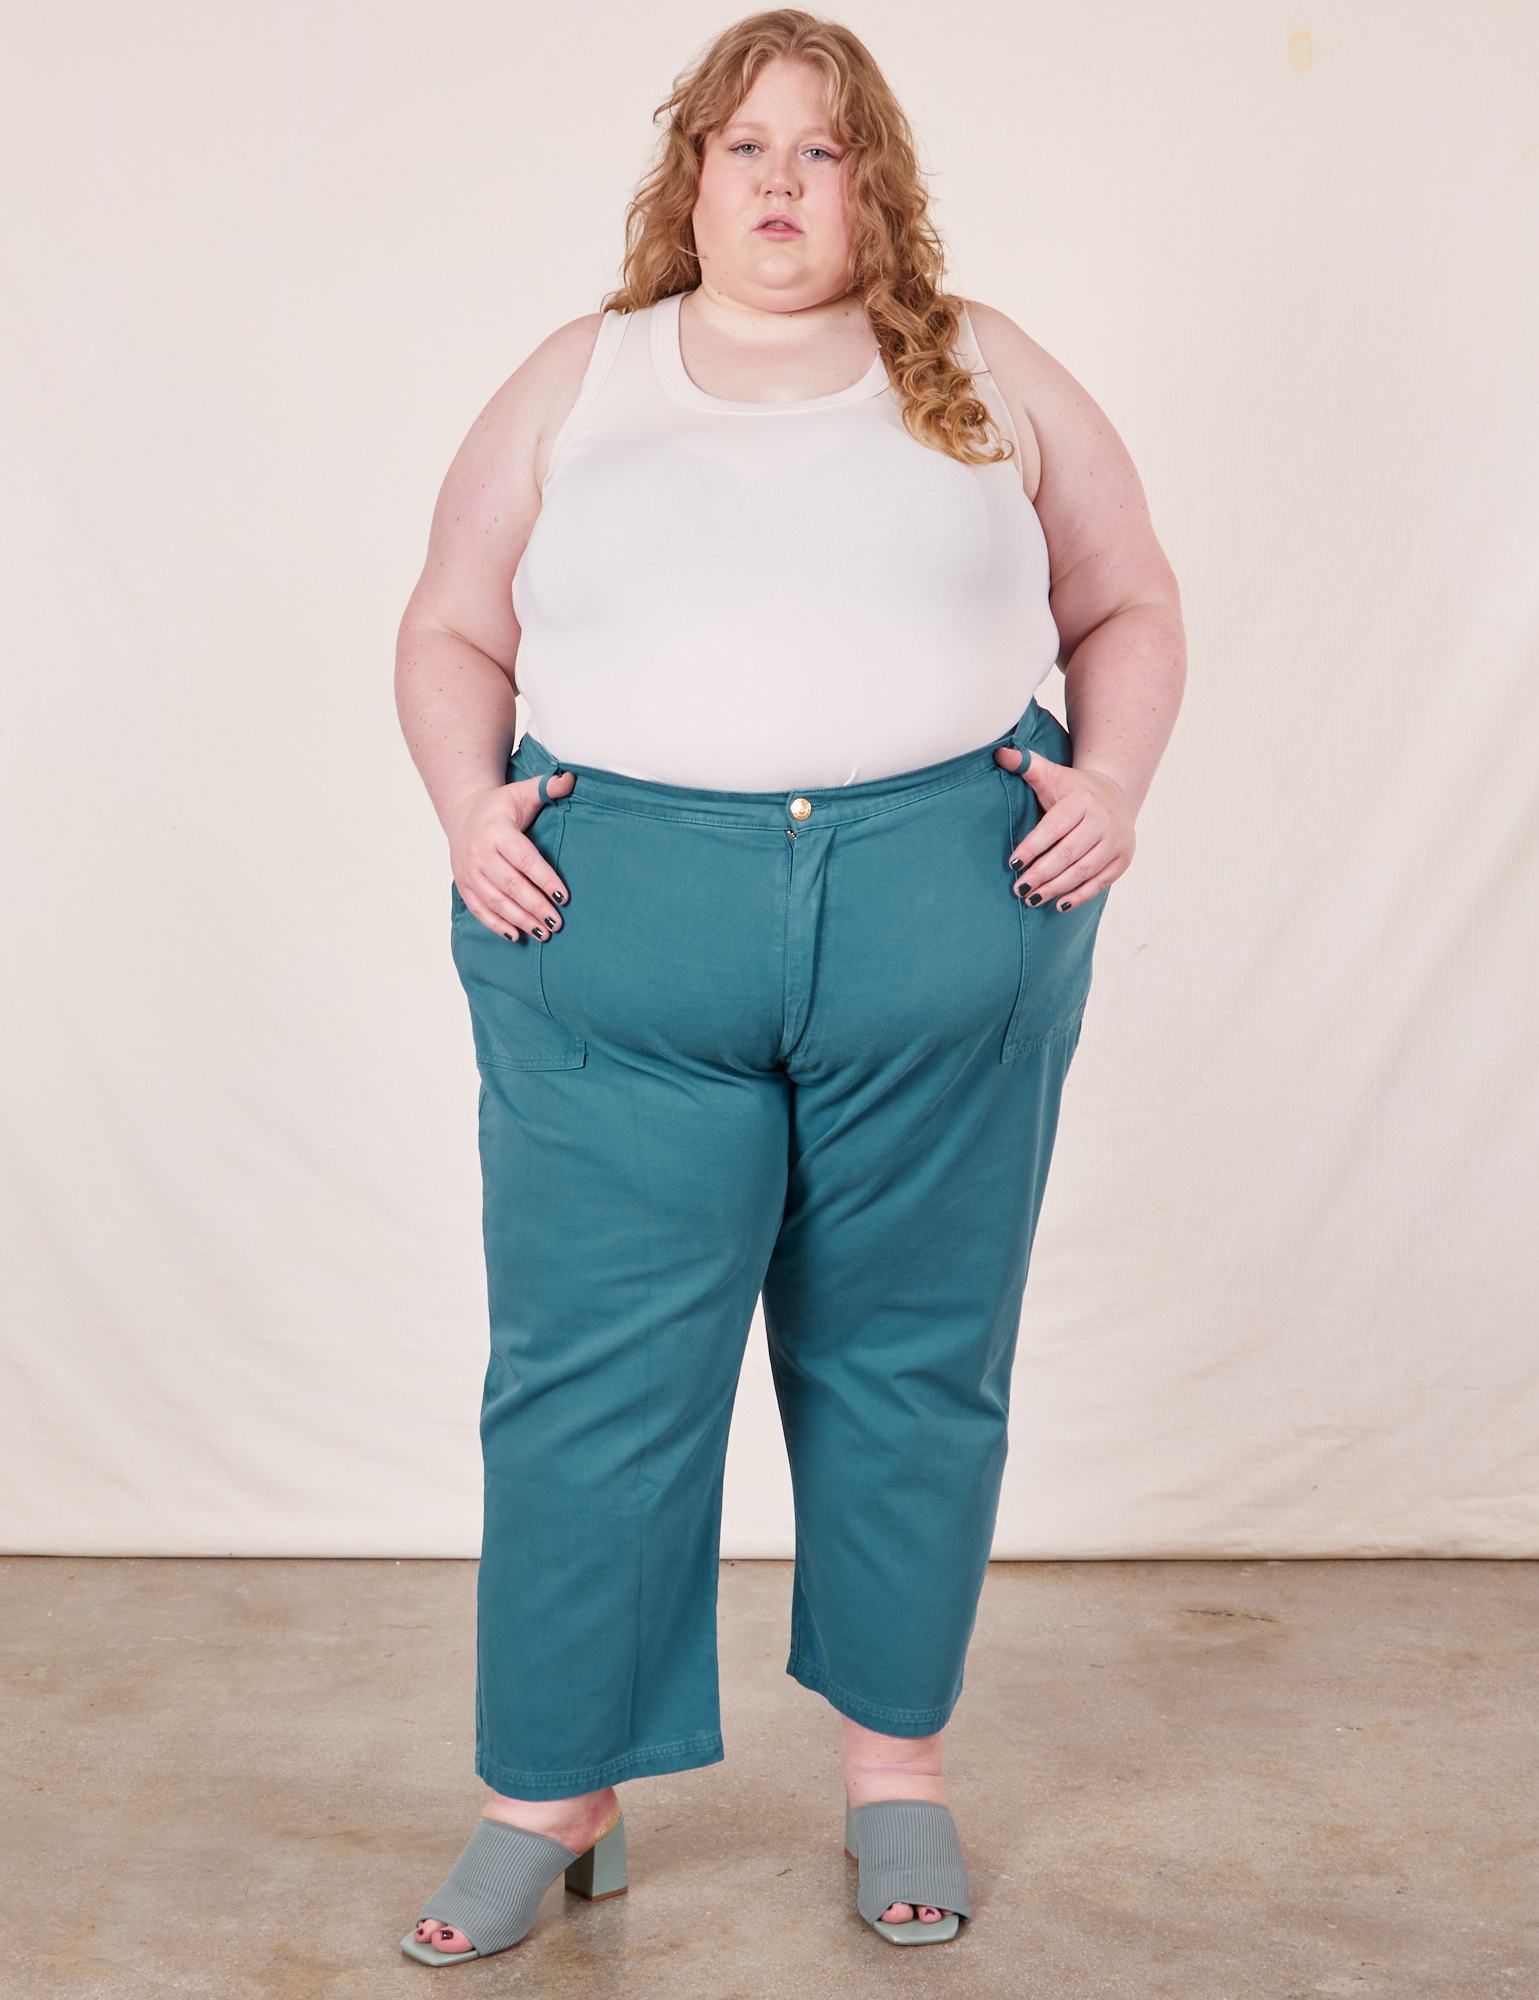 Catie is 5&#39;11&quot; and wearing 5XL Work Pants in Marine Blue paired with vintage off-white Tank Top